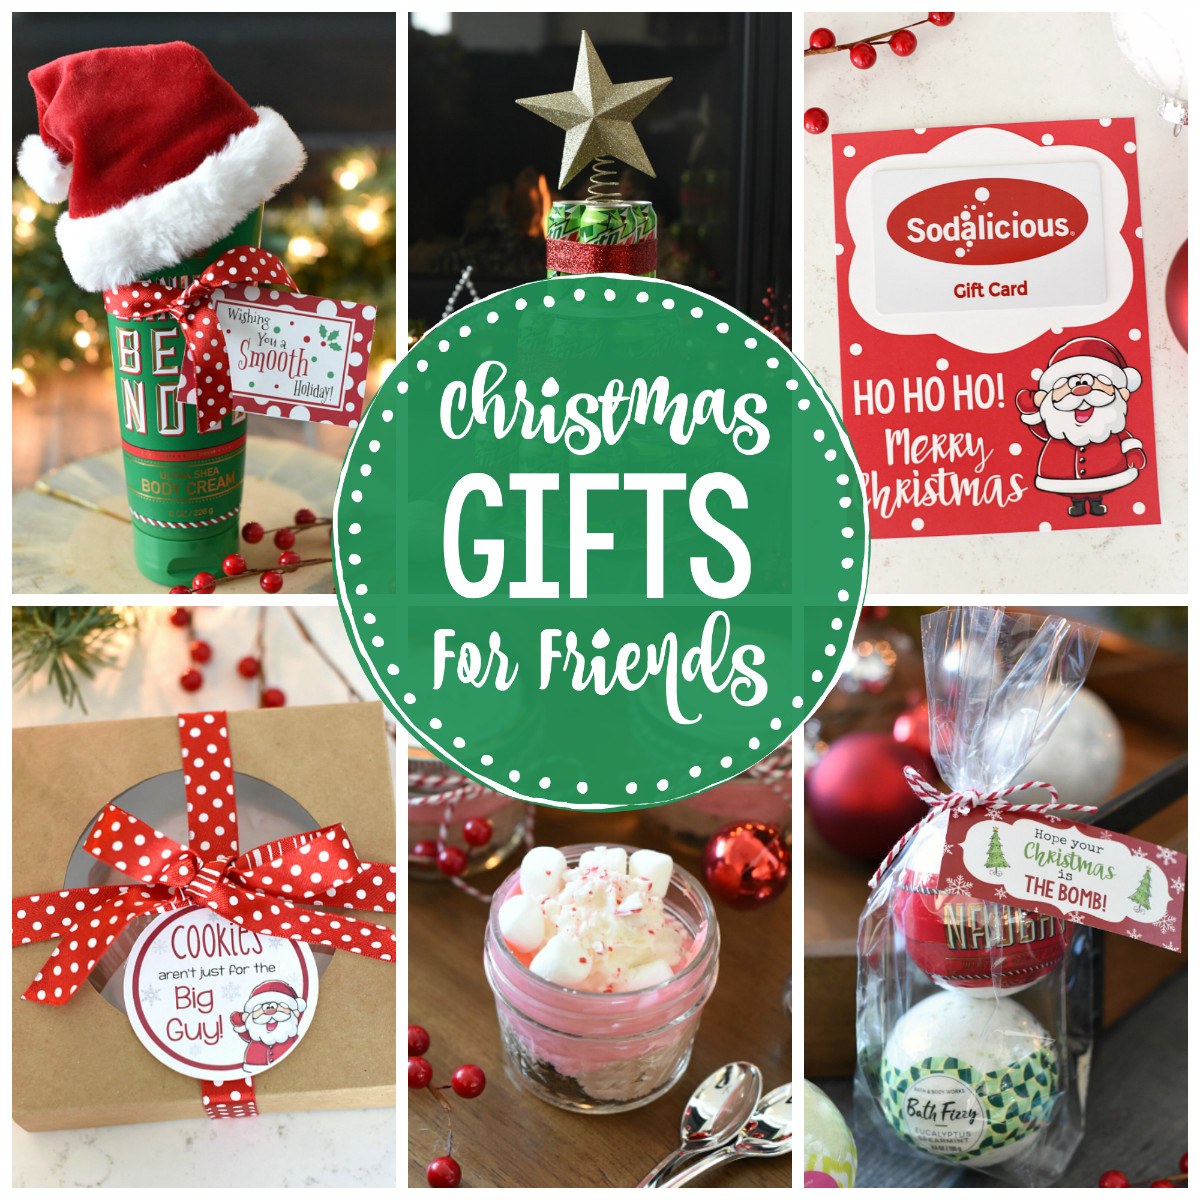 Friends Christmas Gift
 Good Gifts for Friends at Christmas – Fun Squared